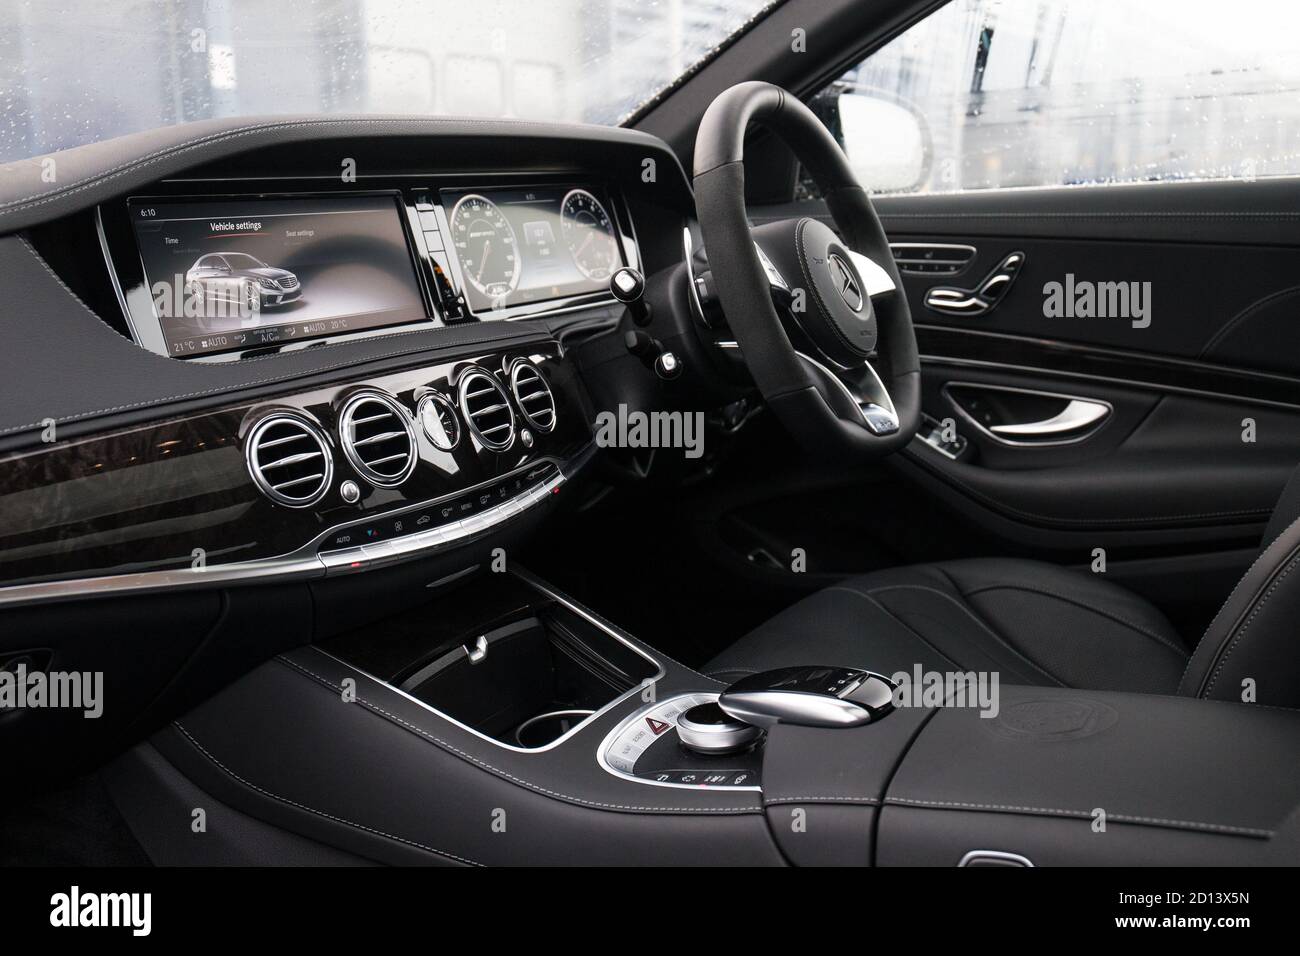 2016 Mercedes-Benz S-Class S 63 AMG at Rockingham Motor Speedway,  Northamptonshire, 31st March 2016 Stock Photo - Alamy